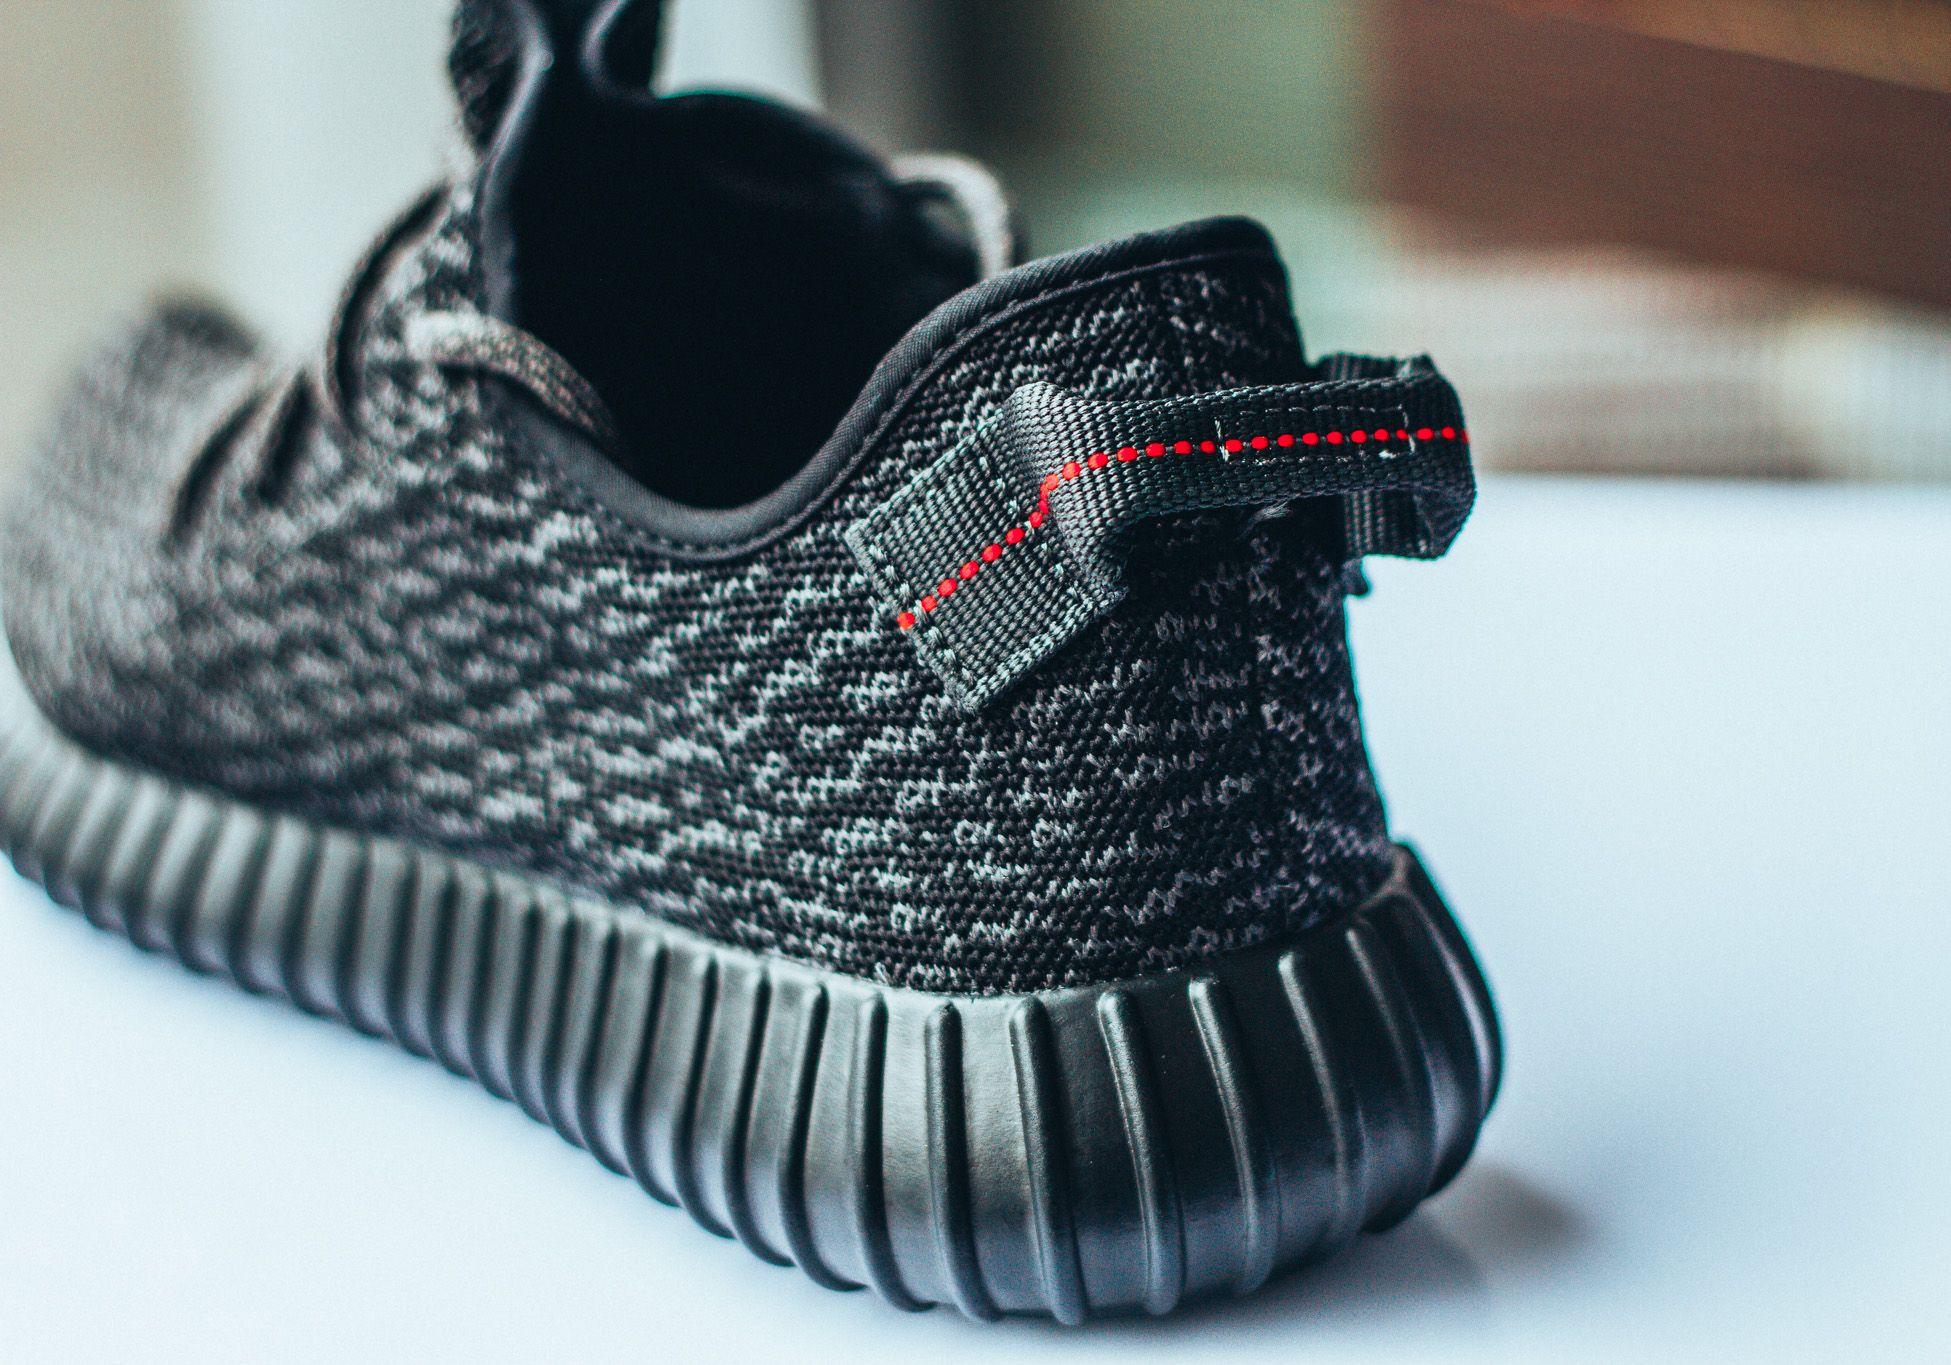 Yzy Logo - Adidas Originals Yeezy Boost 350 'Black' - Review and Launch